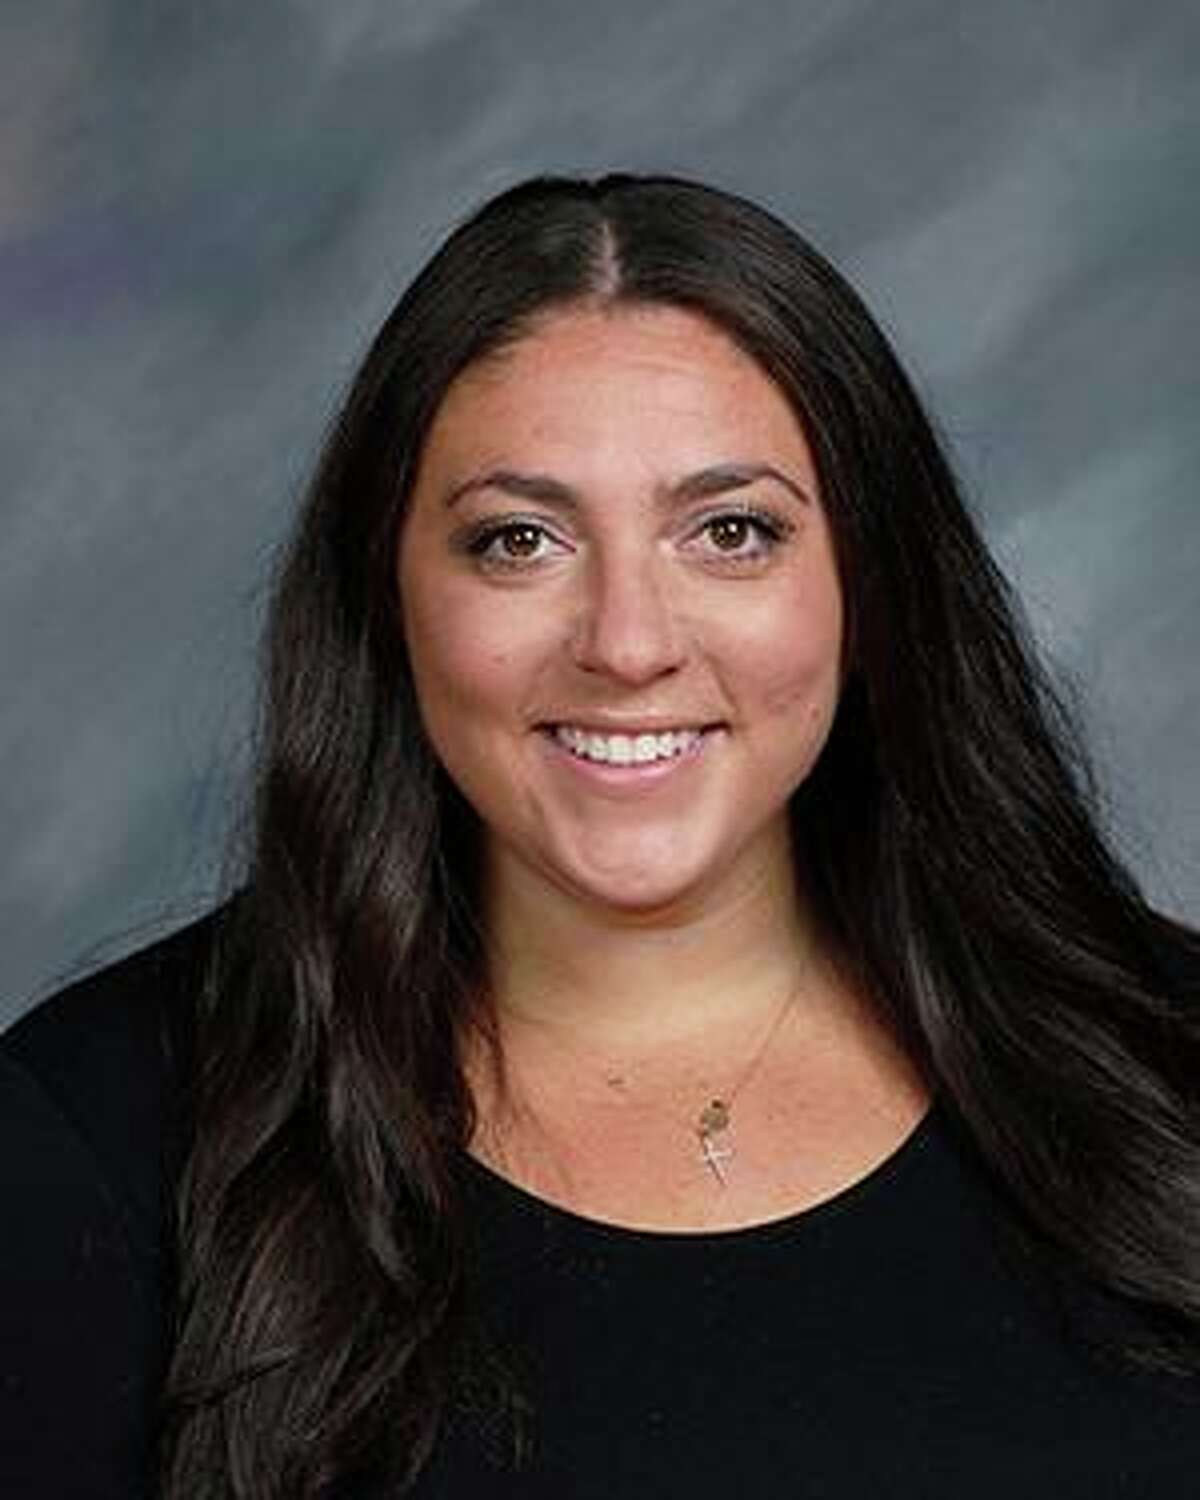 Erin Montague will serve as Western Middle School’s interim assistant principal, beginning Aug. 12, 2022.